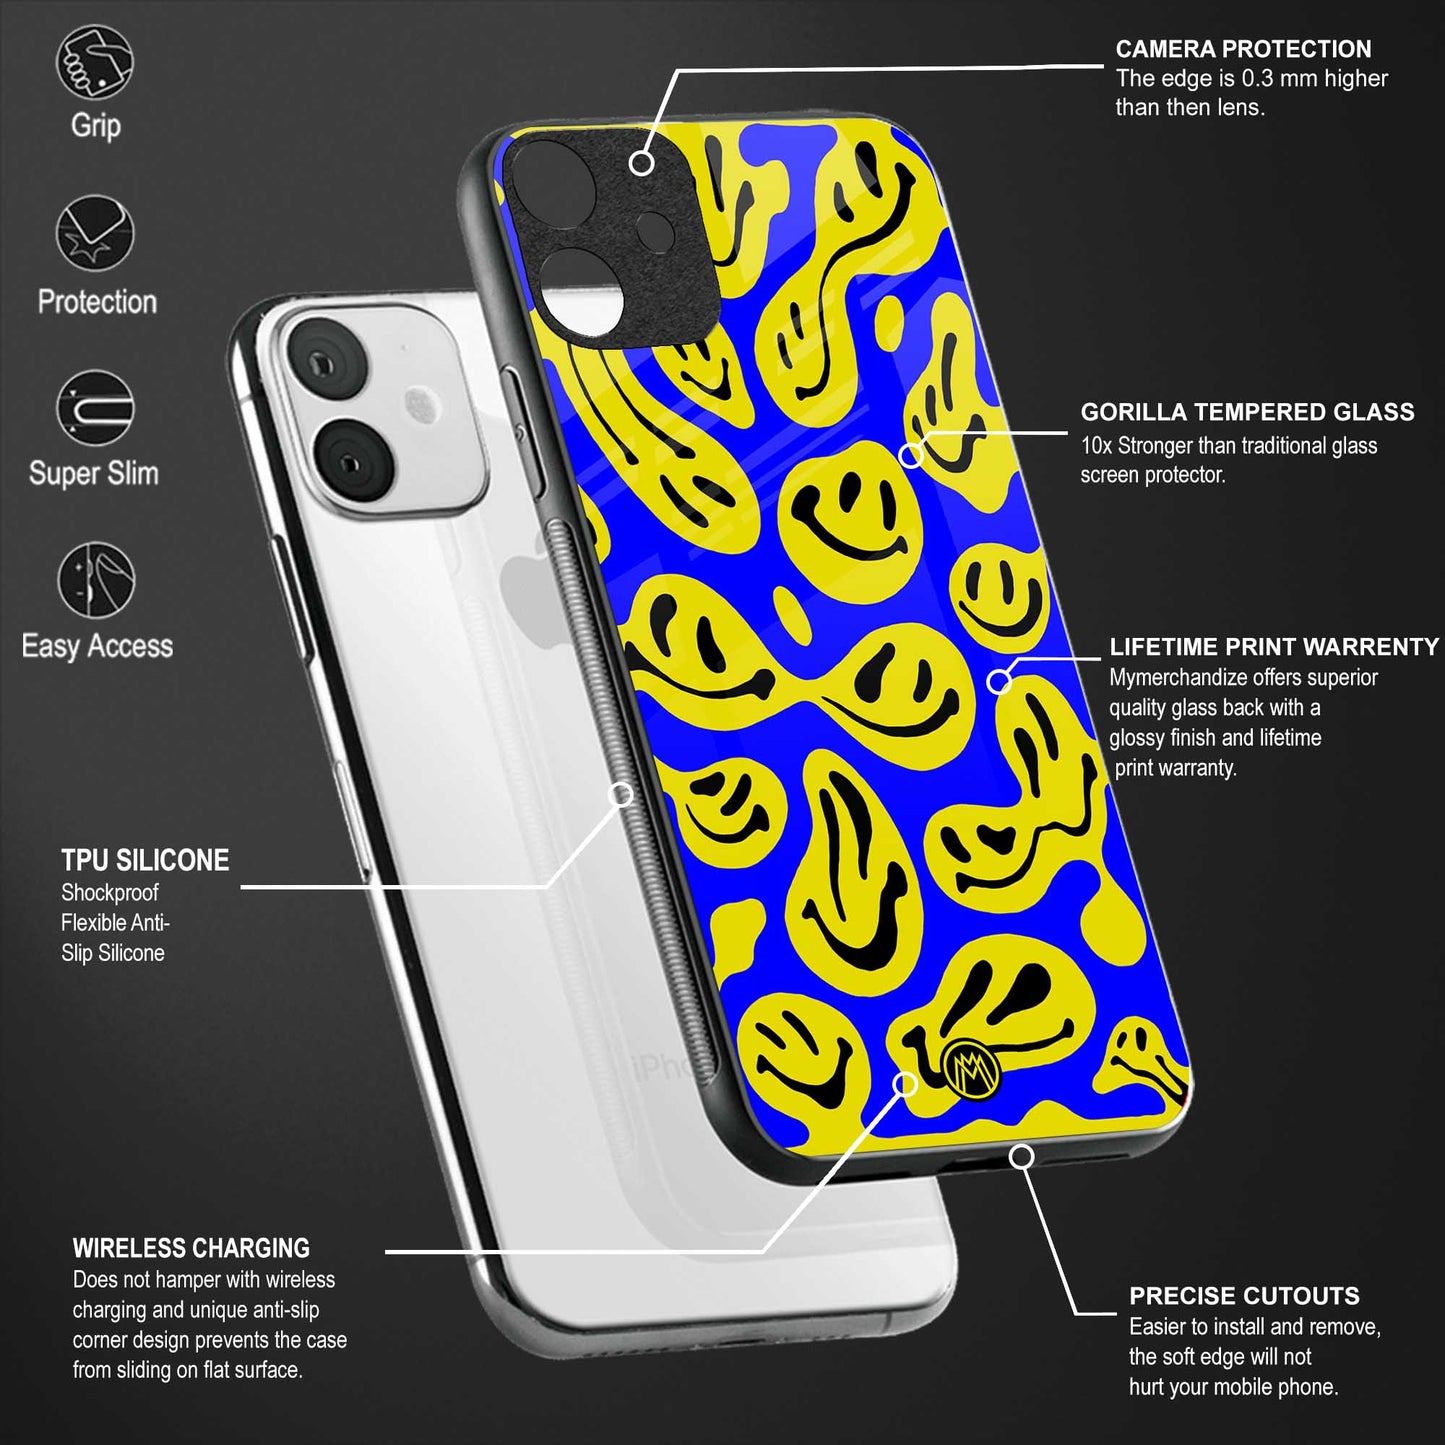 acid smiles yellow blue back phone cover | glass case for vivo y16